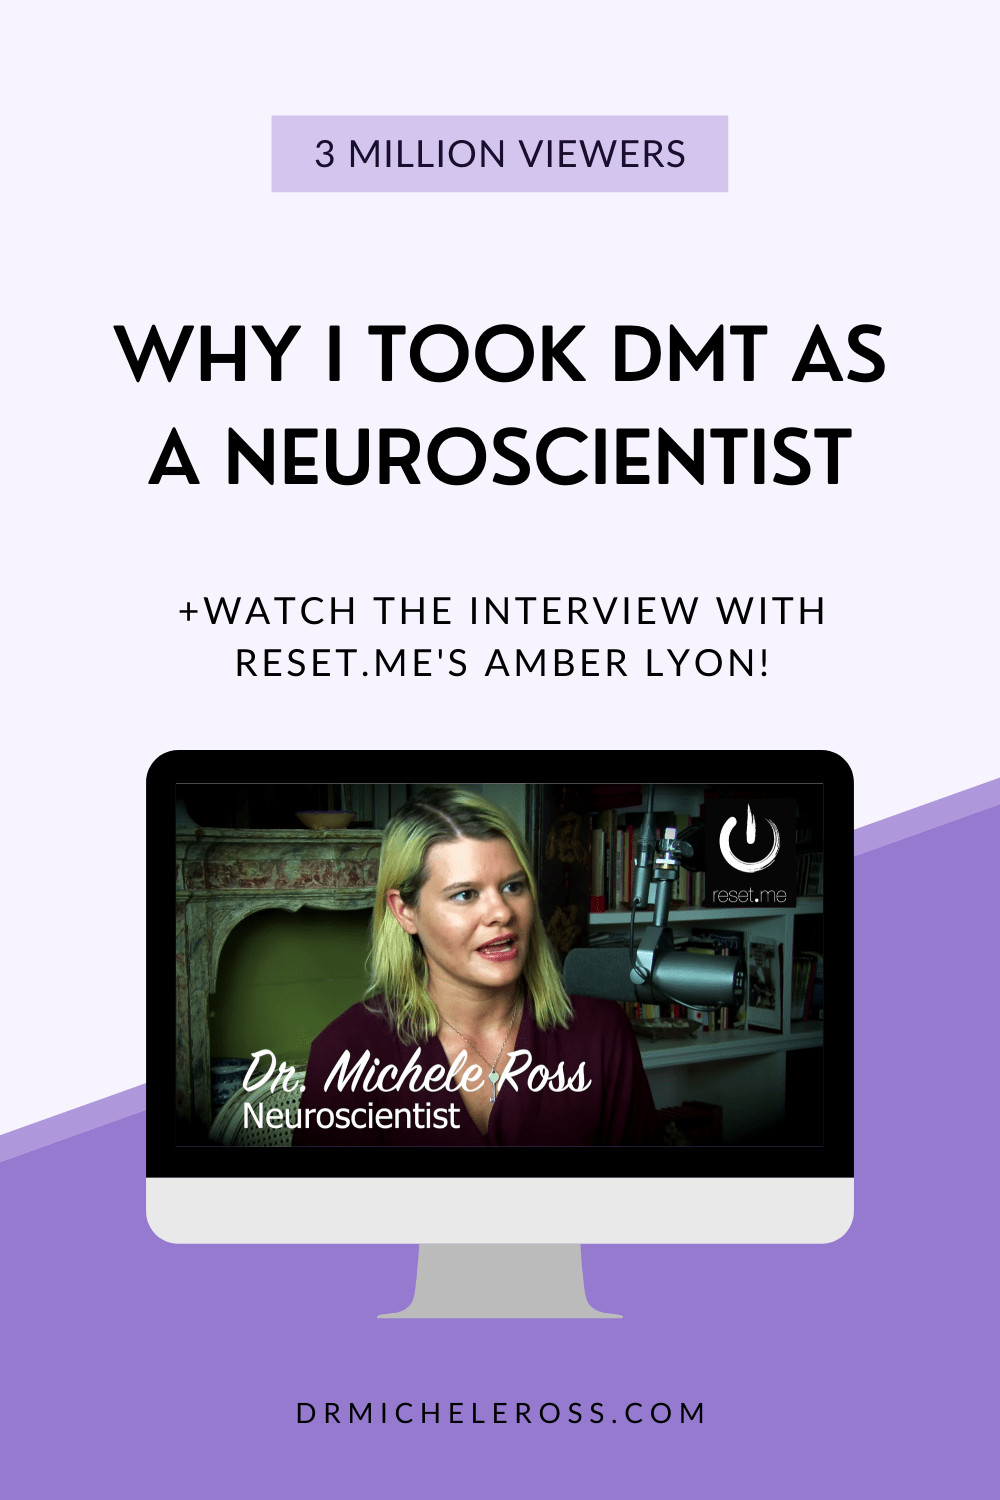 Dr. Michele Ross is a brain scientist interviewed about DMT